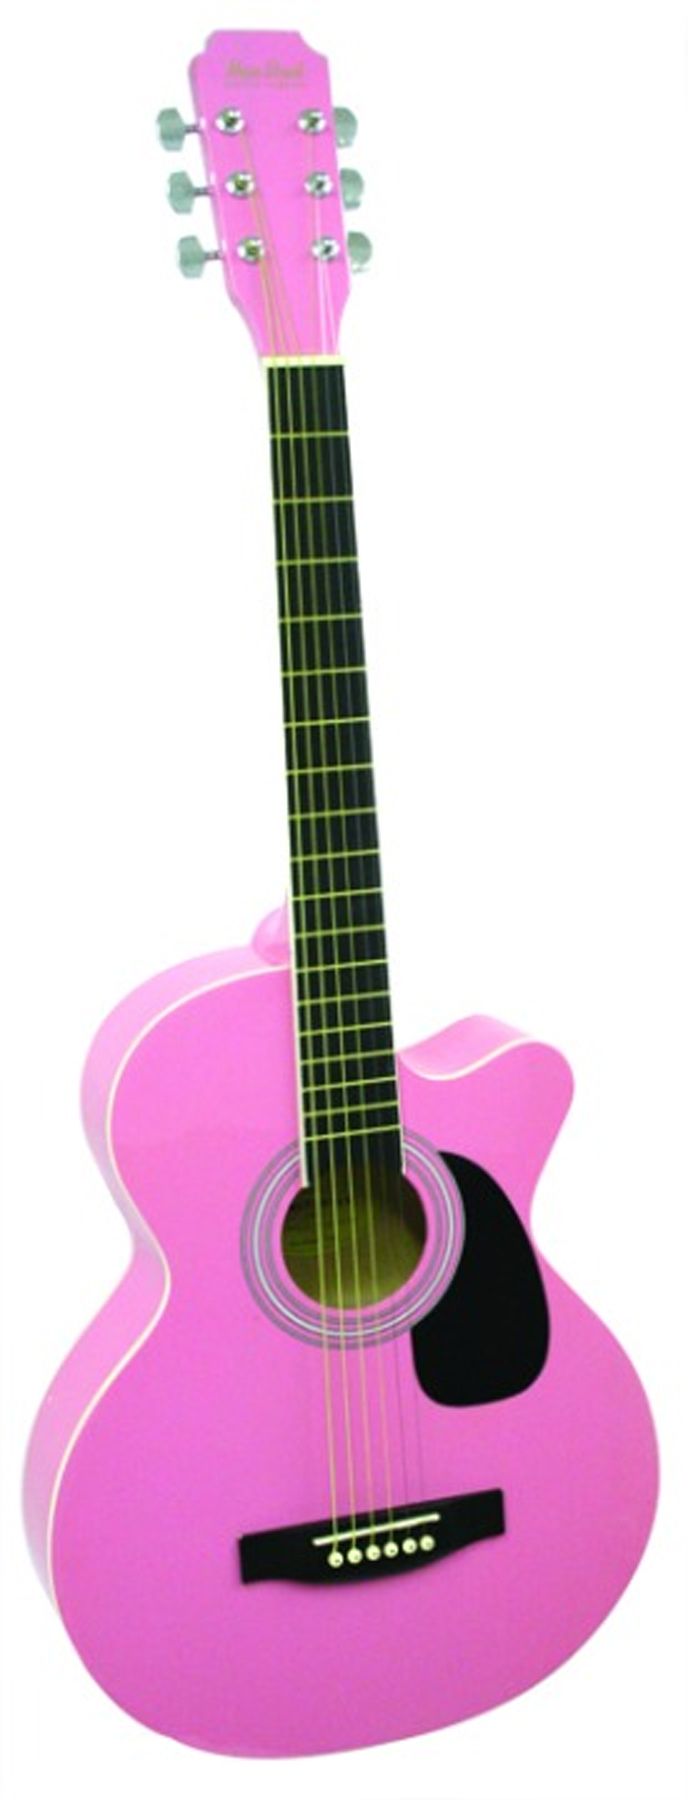 Main Street 38-Inch Acoustic Guitar with High-Gloss Pink Finish